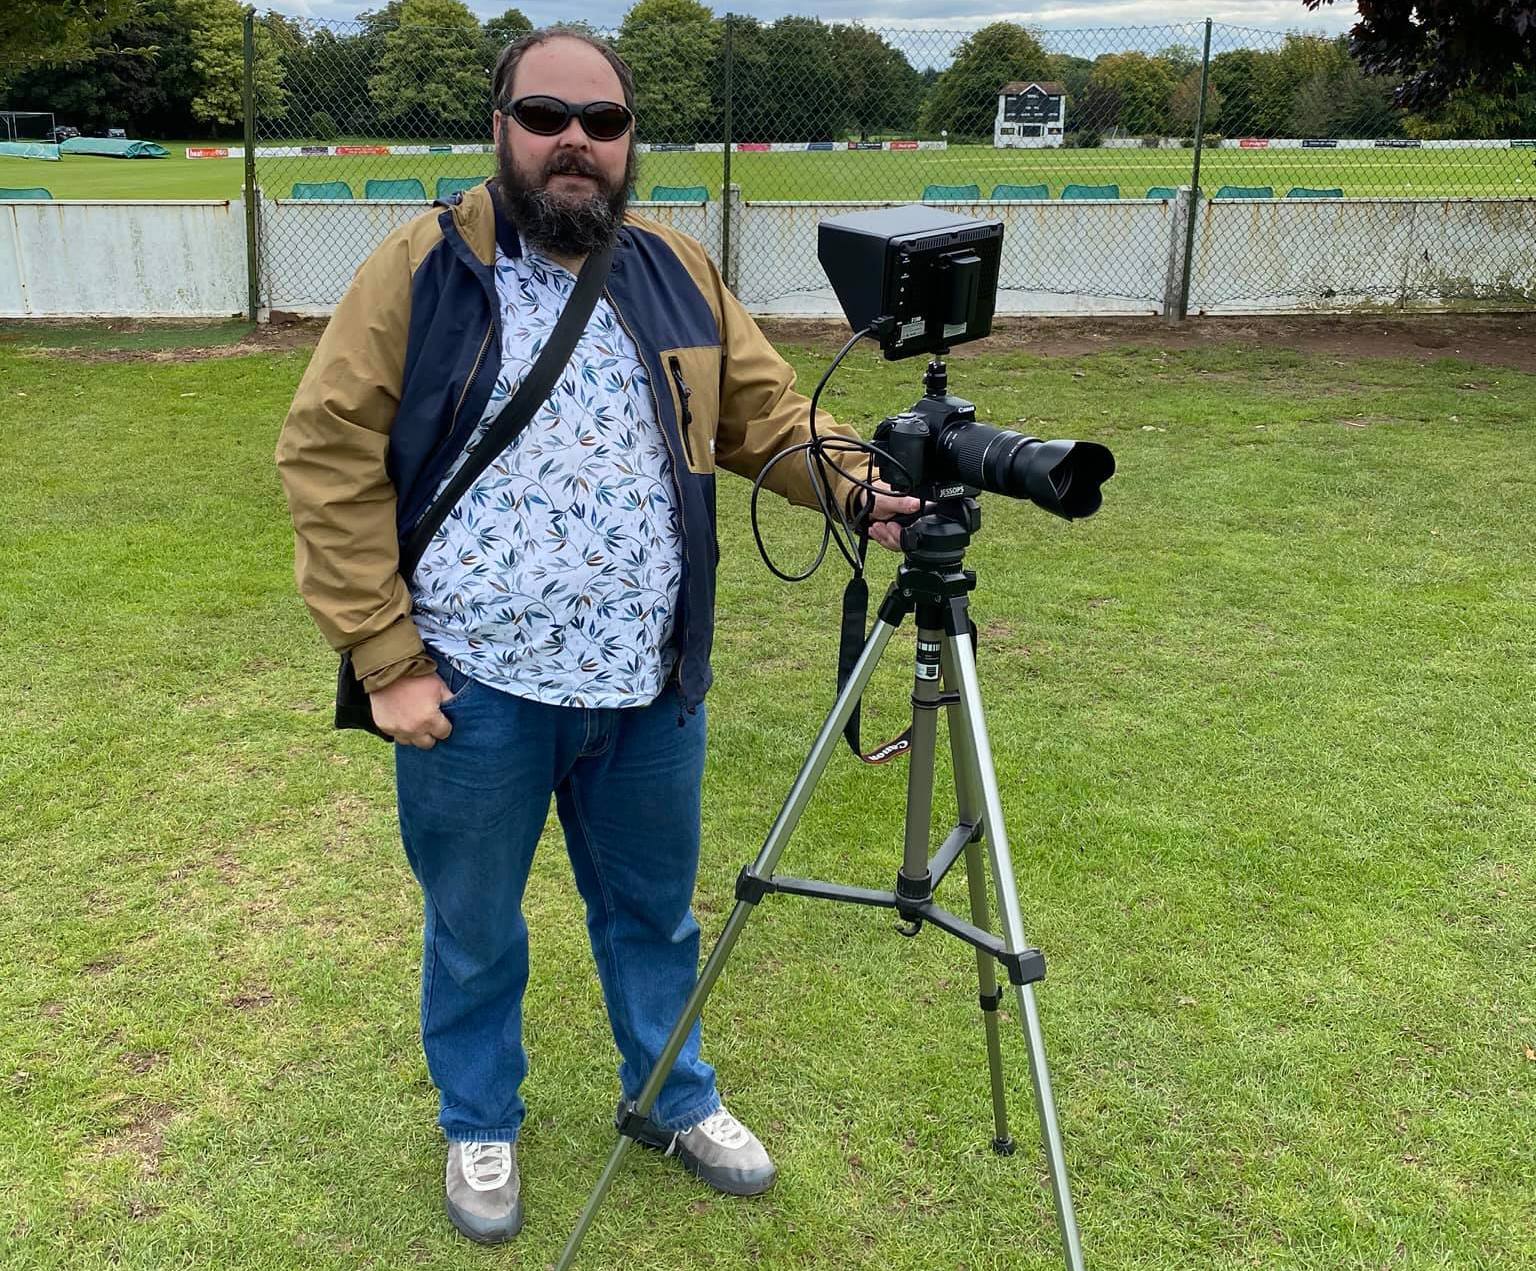 Steve, an SVI member is pictured standing with the hand on his camera and tripod in front of a cricket pitch. It's clear the camera has adjustments to help take photographs with a visual impairment.